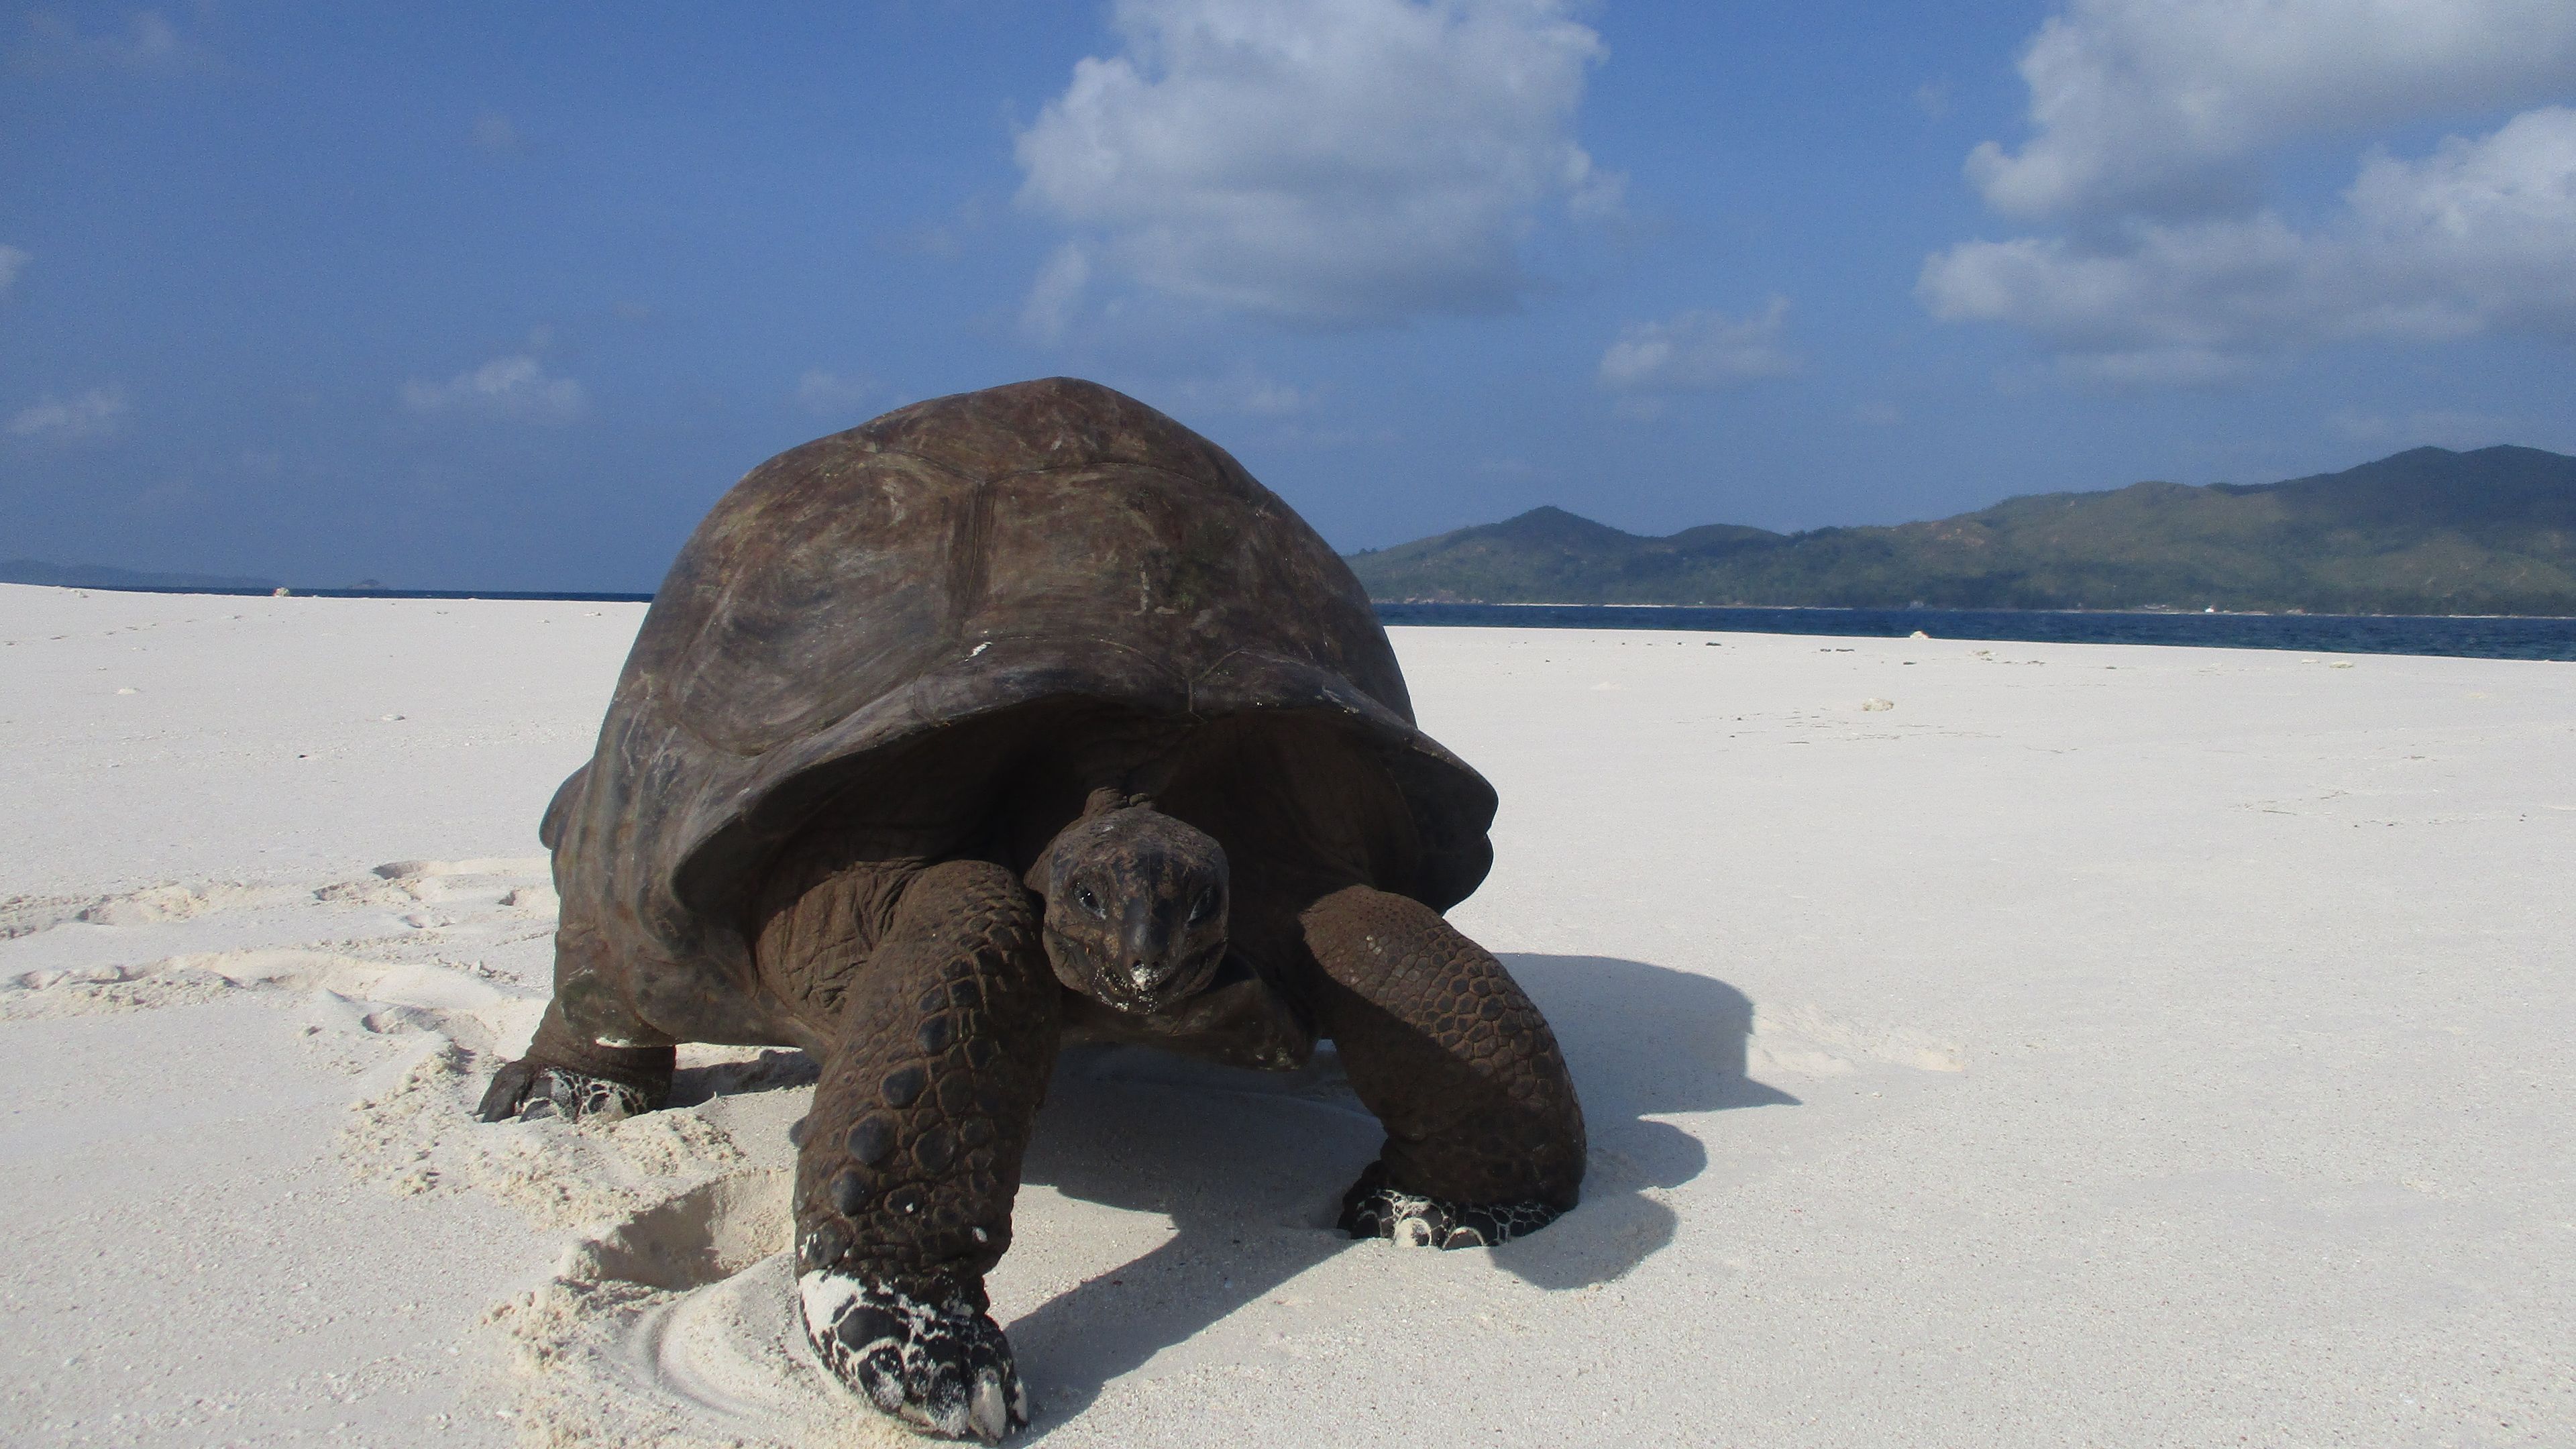 A large Tortoise is standing on the white sany beach of Cousin Island